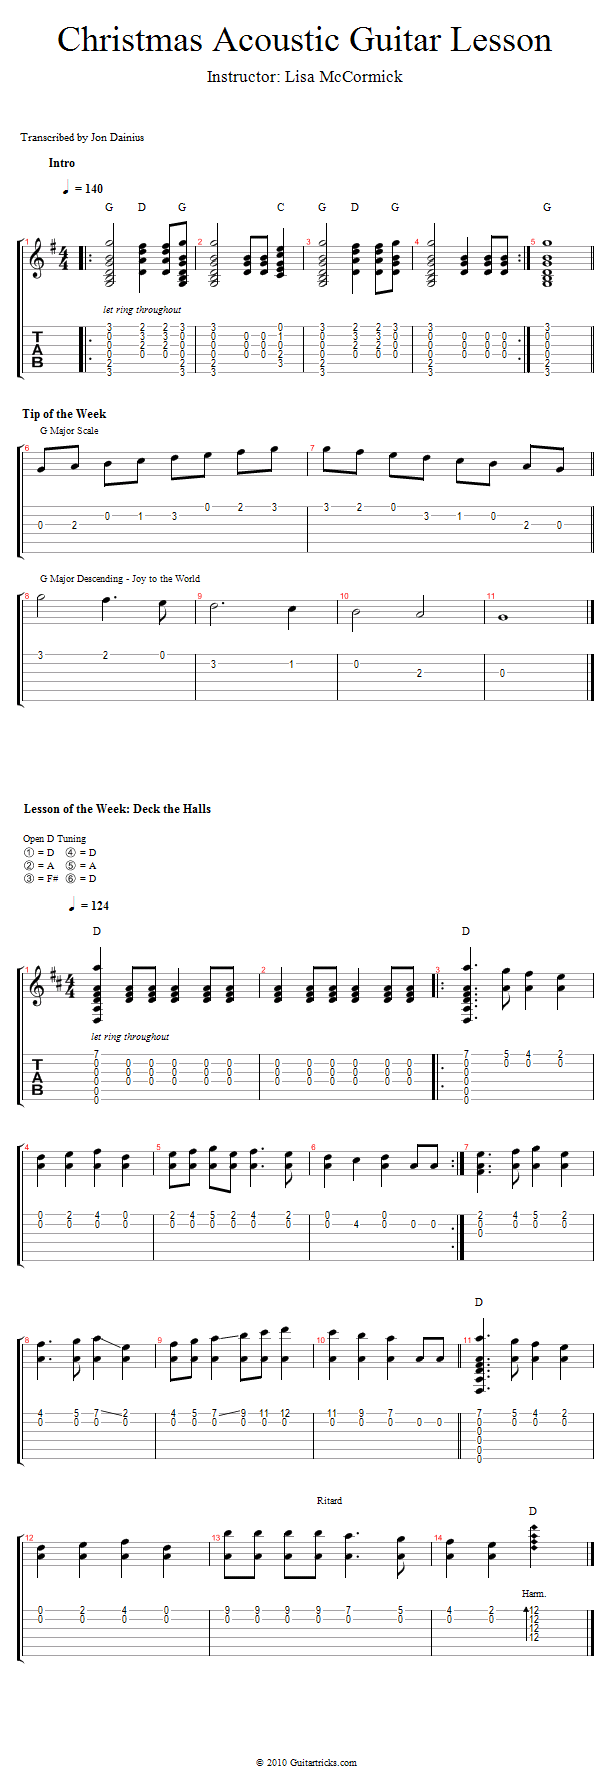 Christmas Acoustic Guitar Lesson song notation